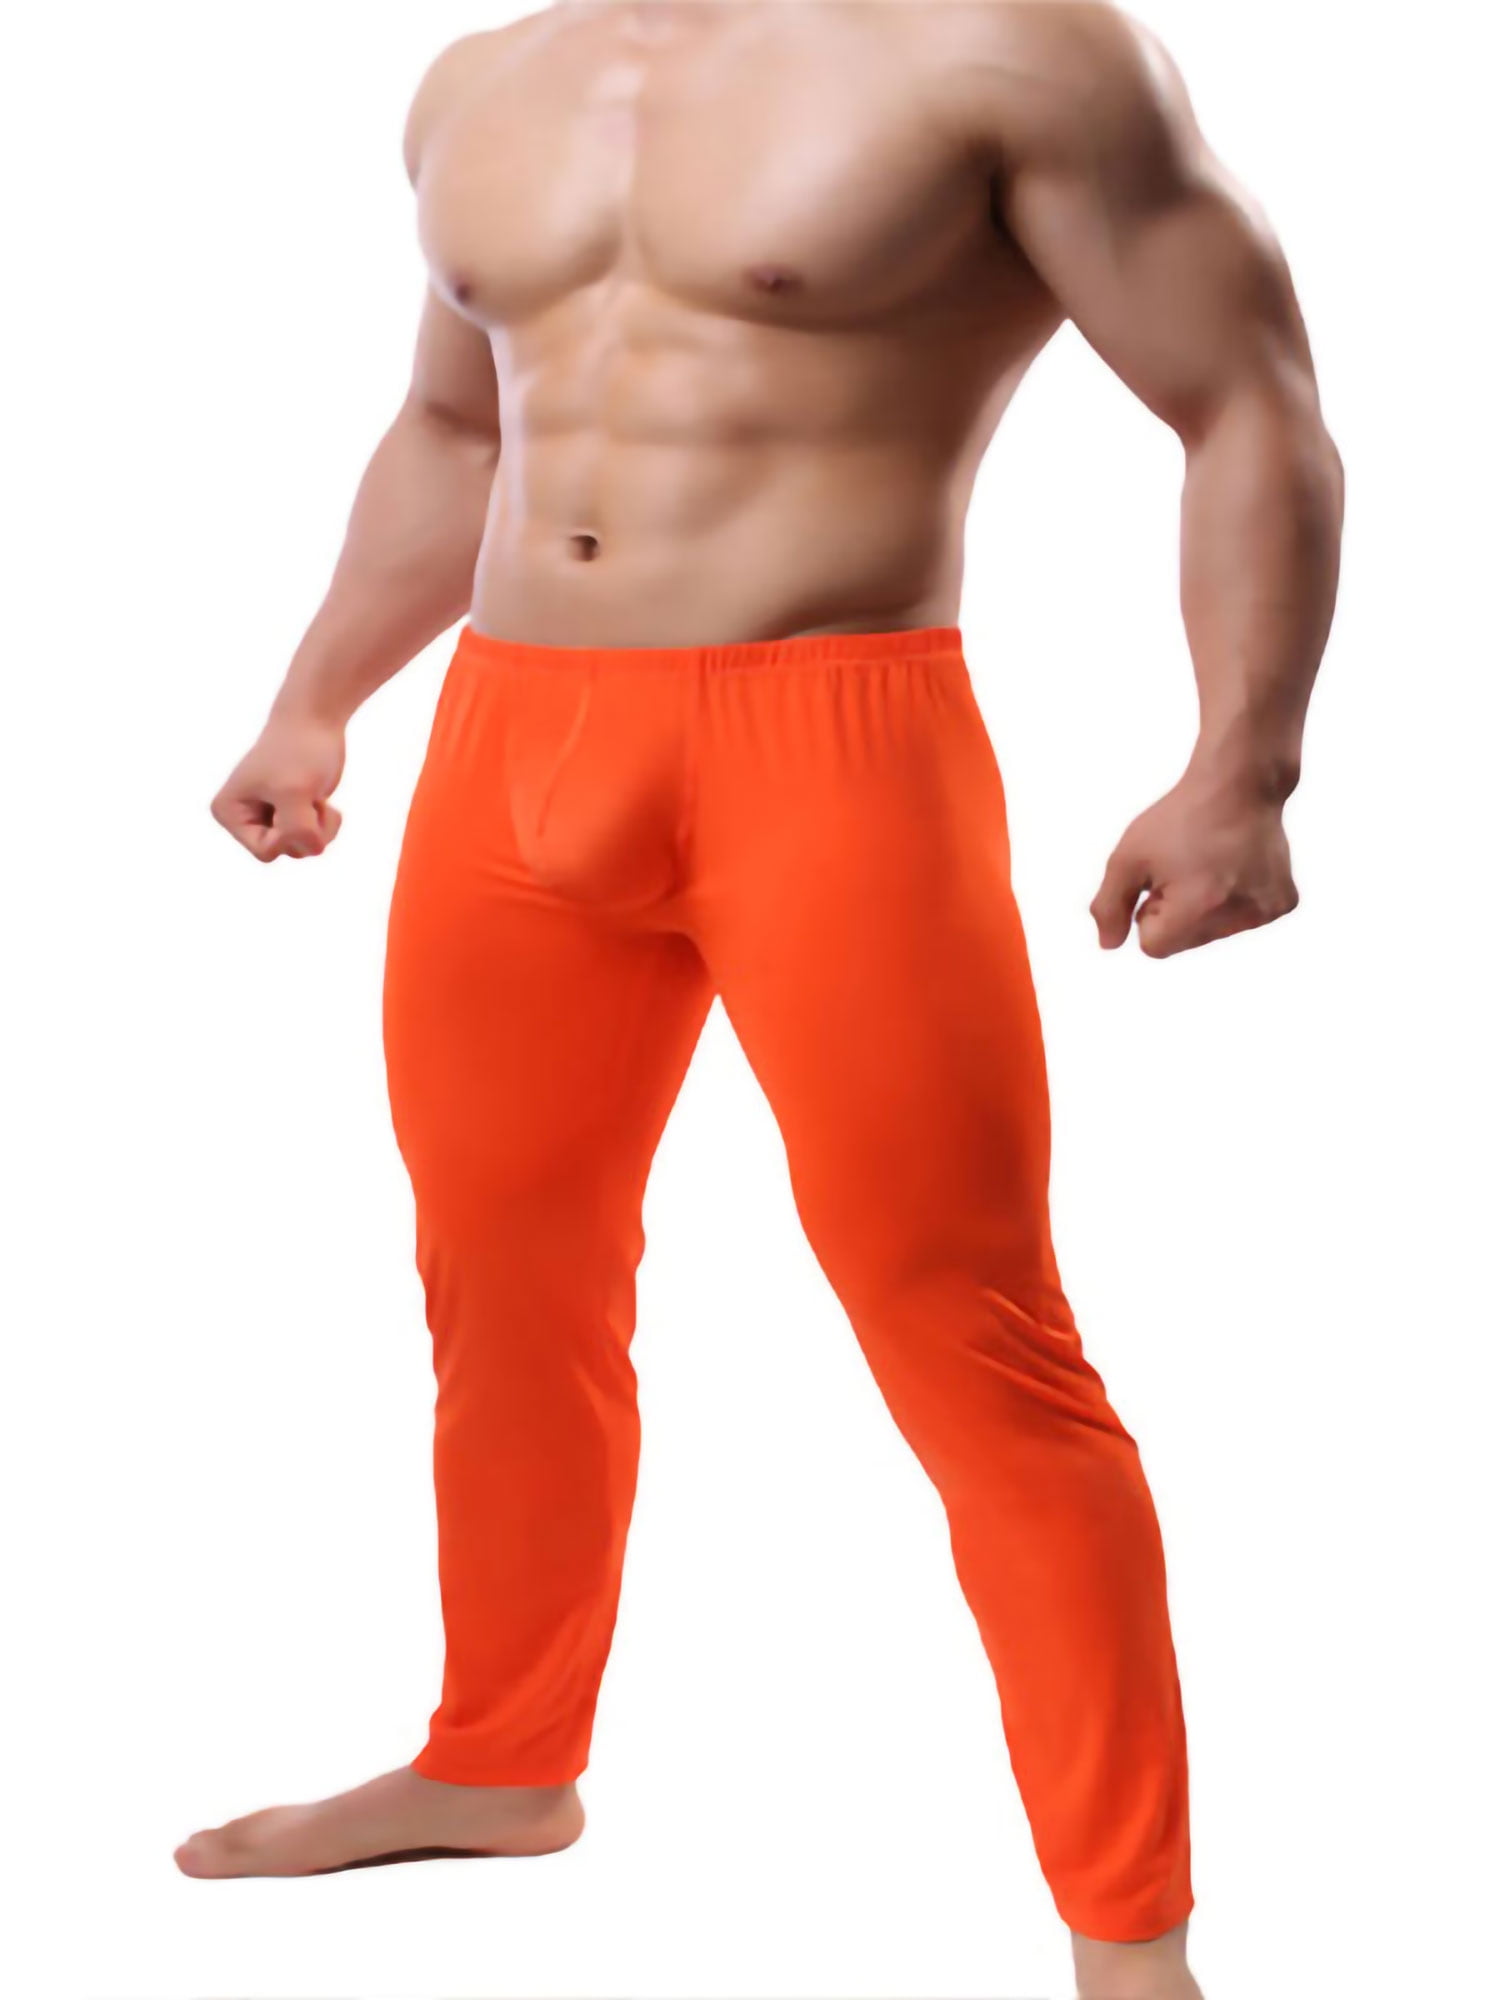 Mens Sport Fitness Workout Trousers Bottoms Compression Base Layer Shorts Pants 